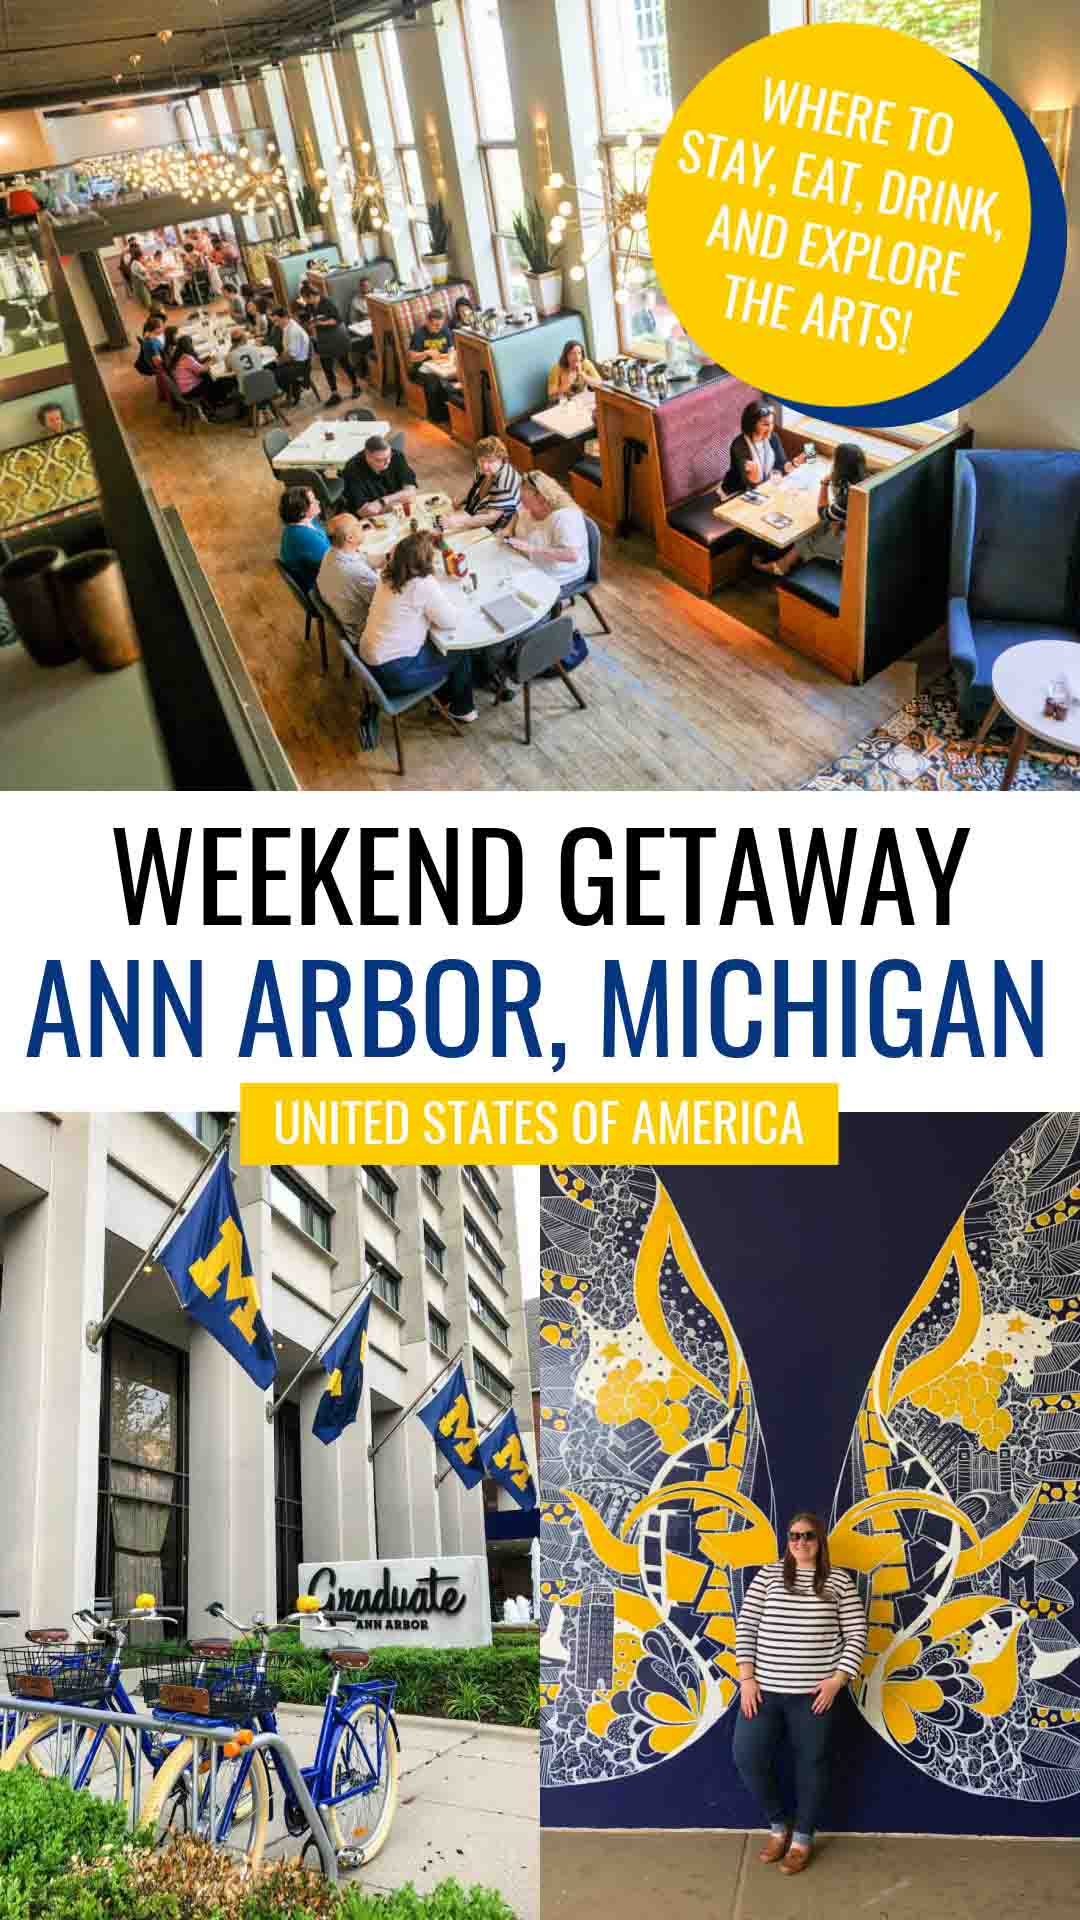 Weekend Getaway Ann Arbor, Michigan pin collage with photo of Sava's Restaurant diners eating in airy dining room, woman in jeans and striped shirt stands in front of maize-and-blue wings mural, and Graduate Ann Arbor hotel exterior with blue bicycles and M flags